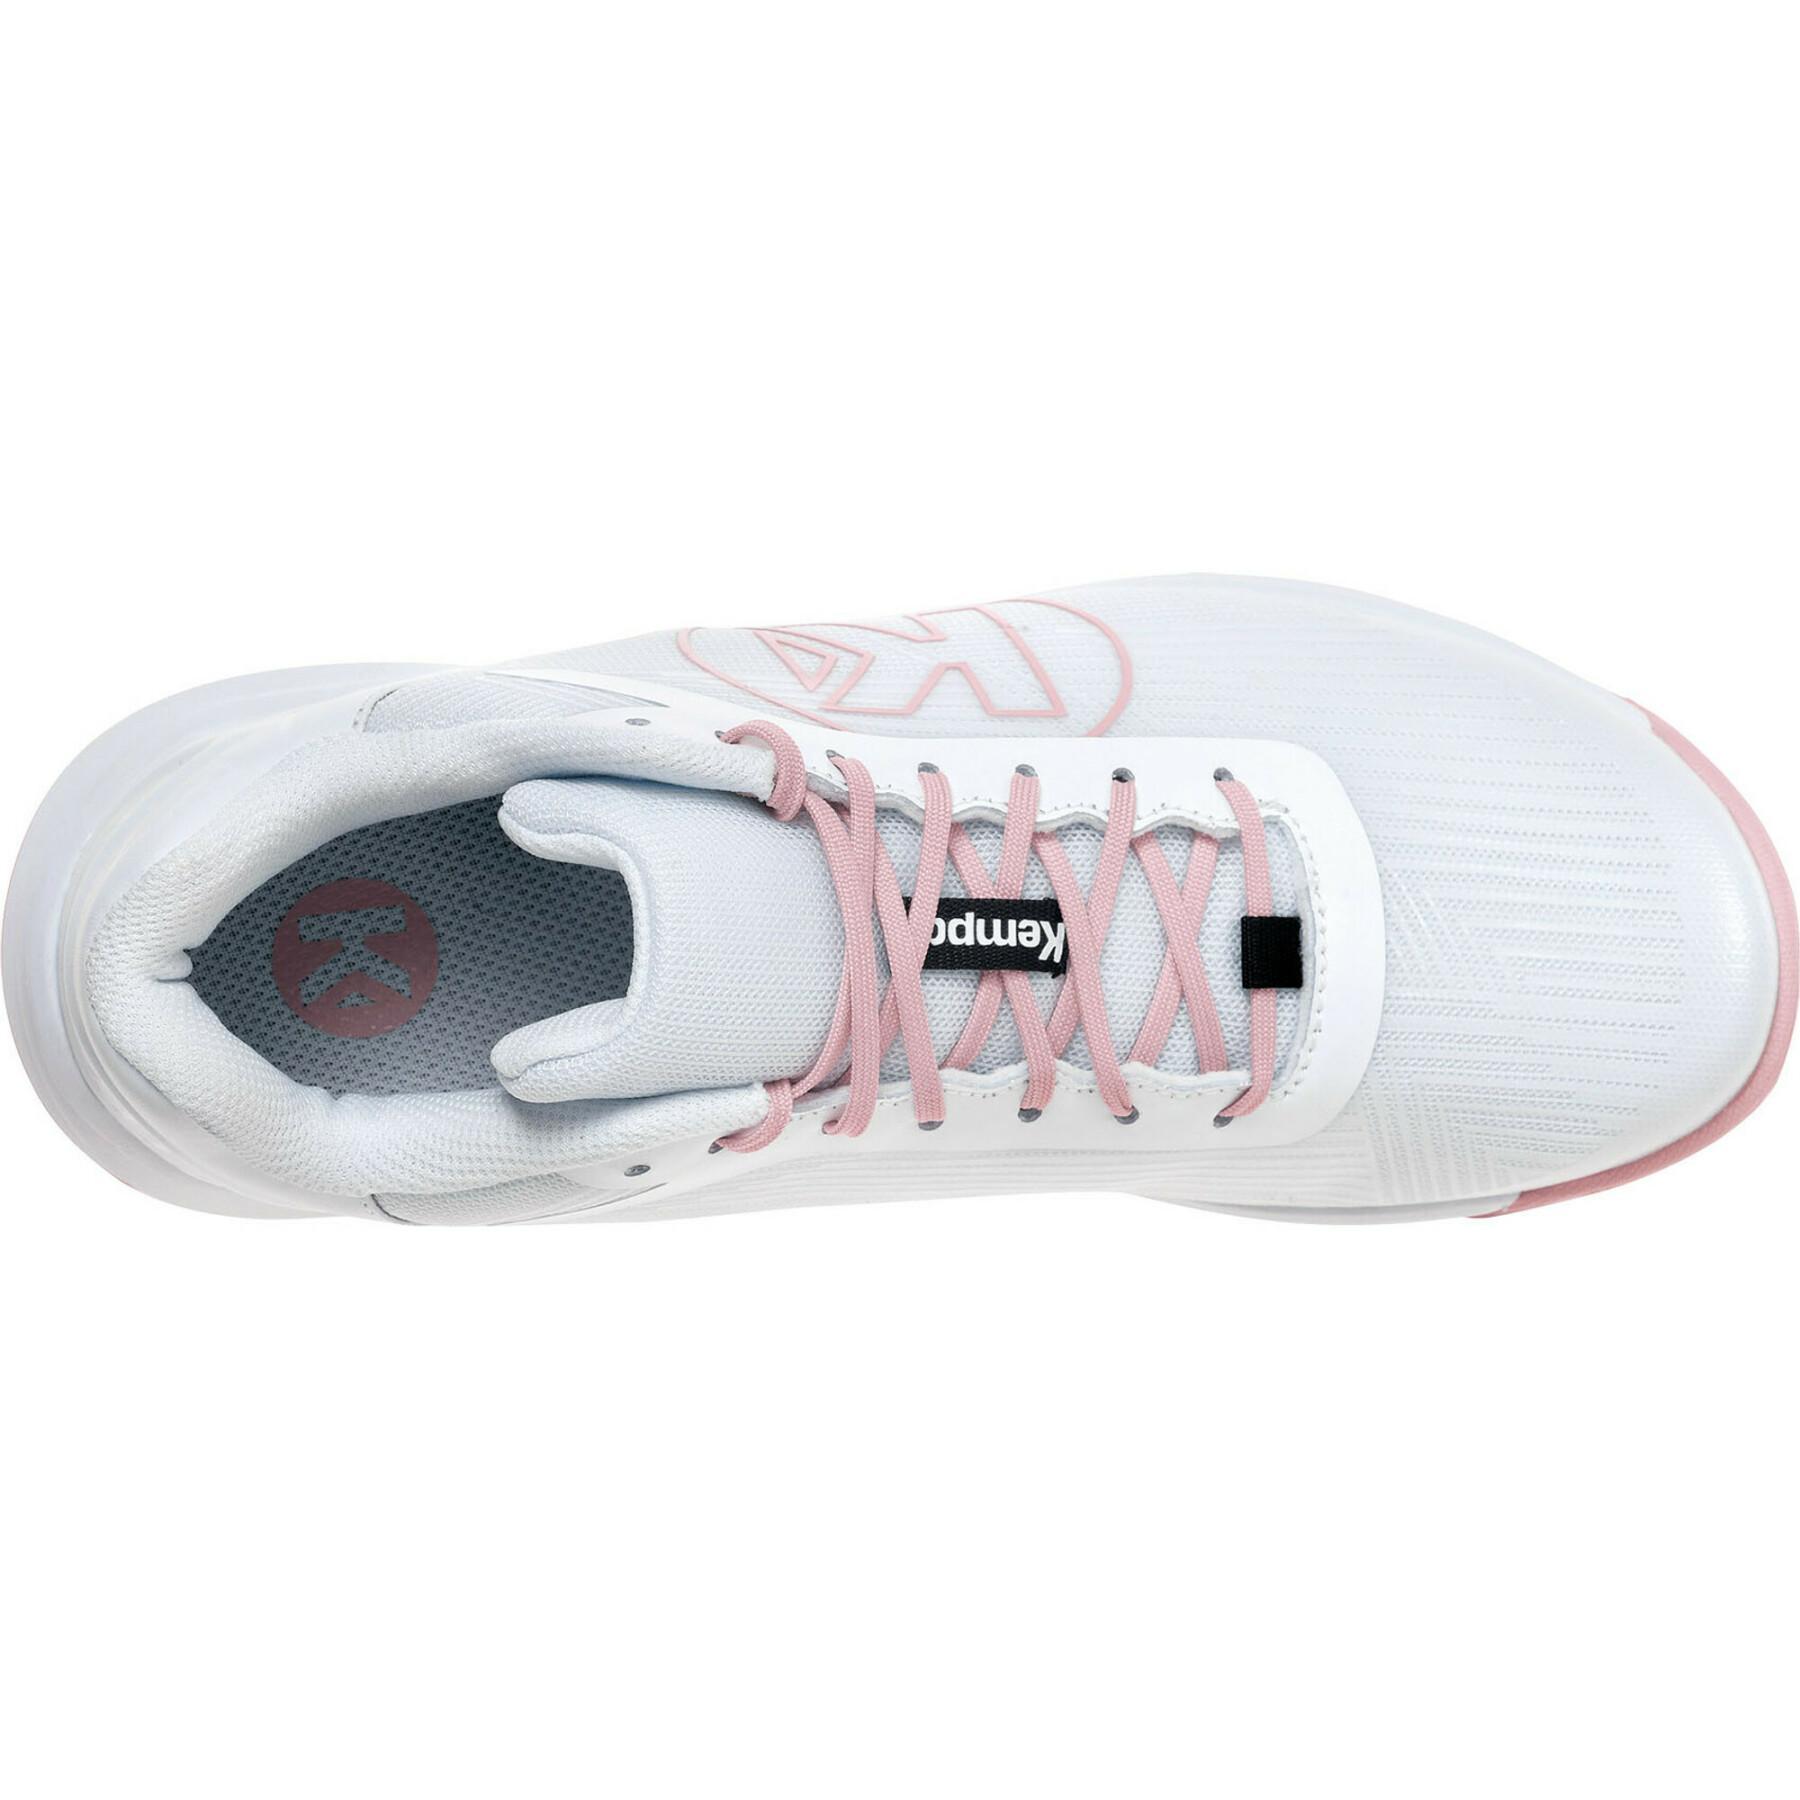 Indoor shoes for women Kempa Attack 2.0